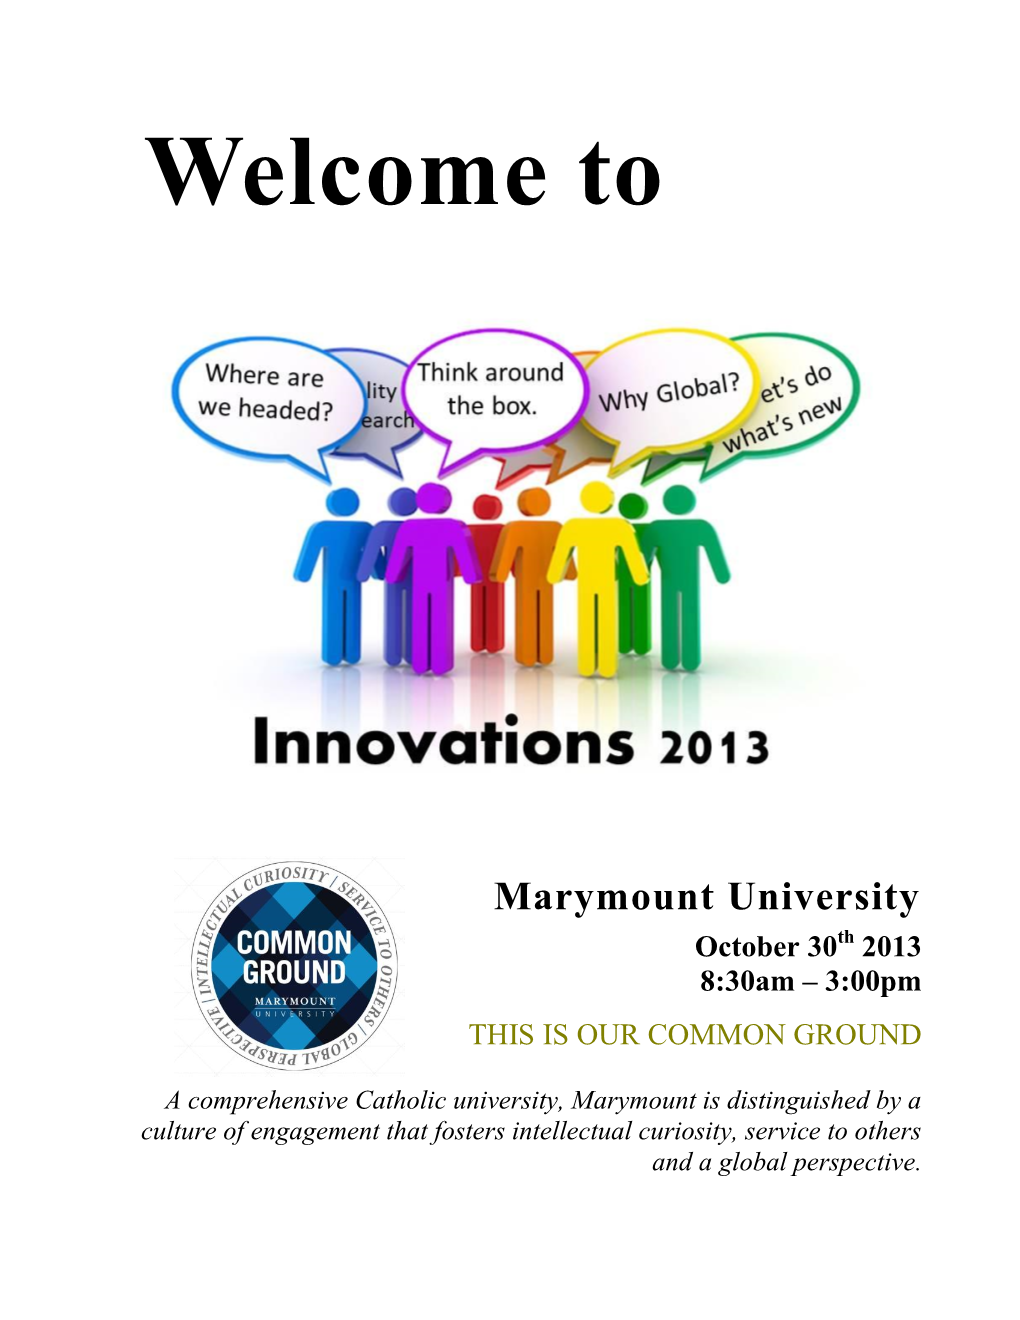 Marymount University October 30Th 2013 8:30Am – 3:00Pm THIS IS OUR COMMON GROUND